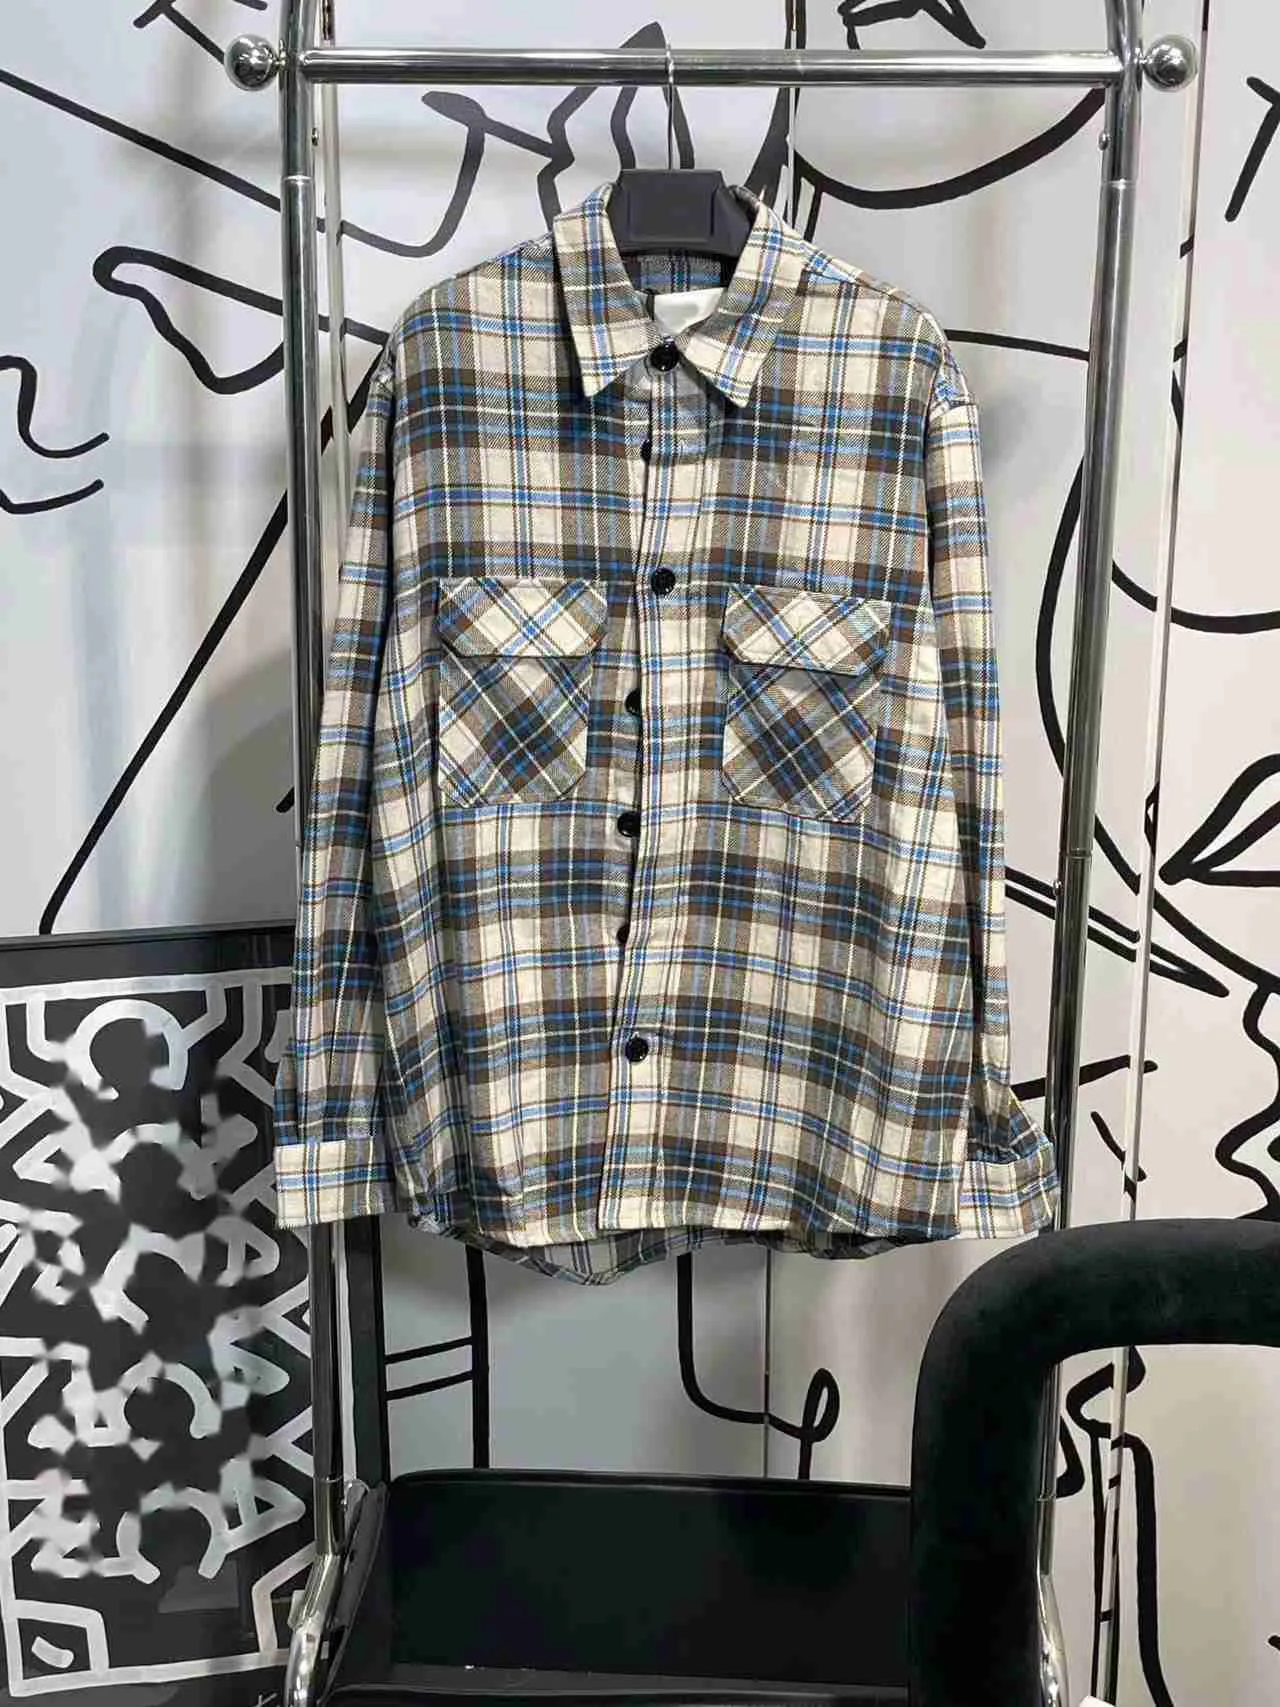 Clinee Autumn and Winter Plaid Shirt Double Pocket Long Sleeve Shirt Casual Loose Men's and Women's Jacket Vintage Small Fragrance Shirt Grey Blue Plaid Shirt